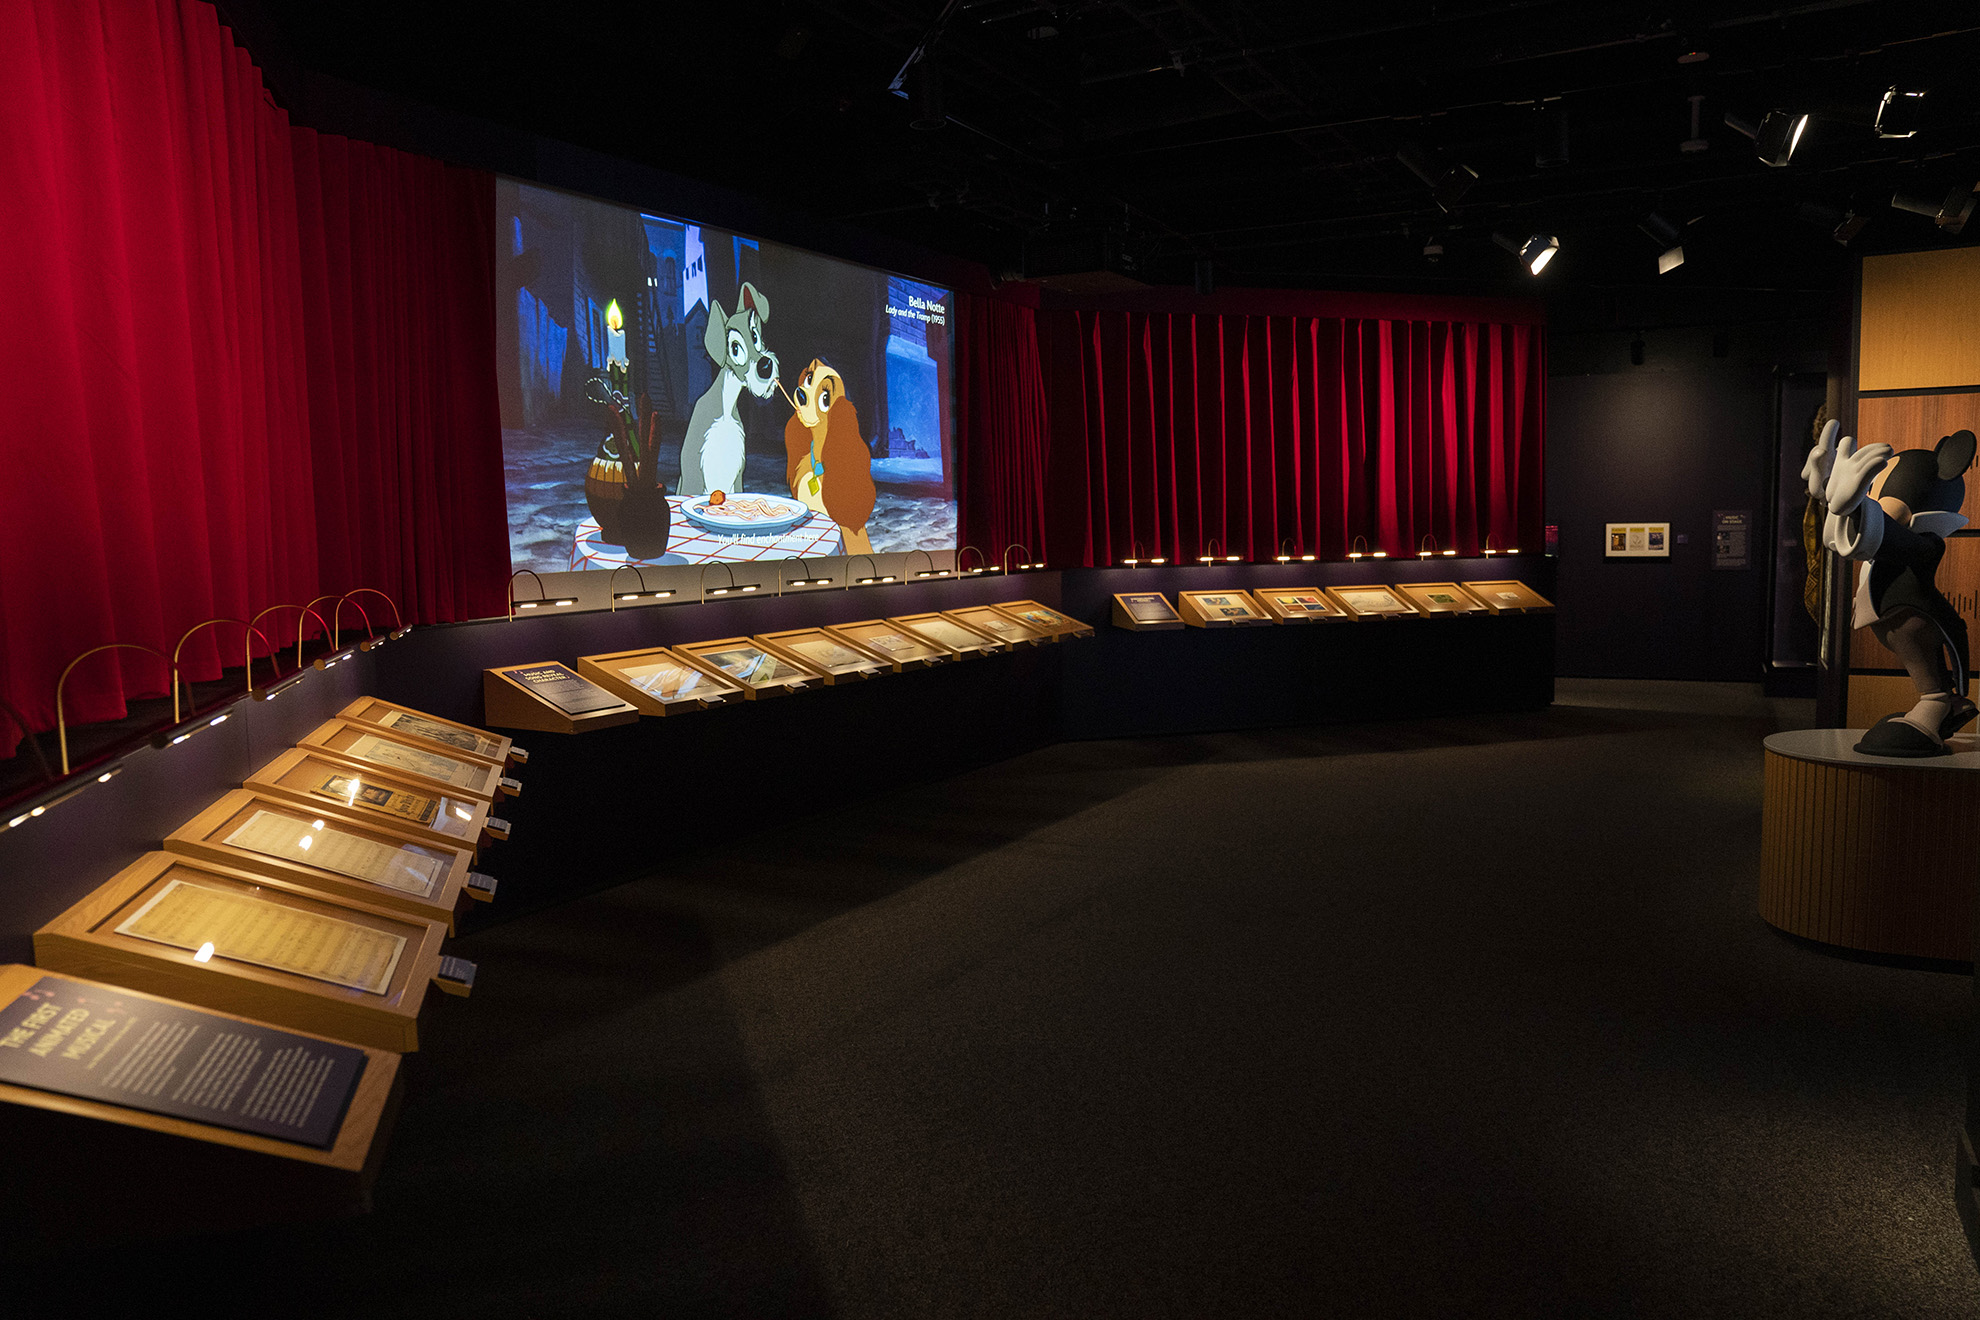 The Magic of Sound and Music gallery at Disney100: The Exhibition, now open at The Franklin Institute in Philadelphia. 